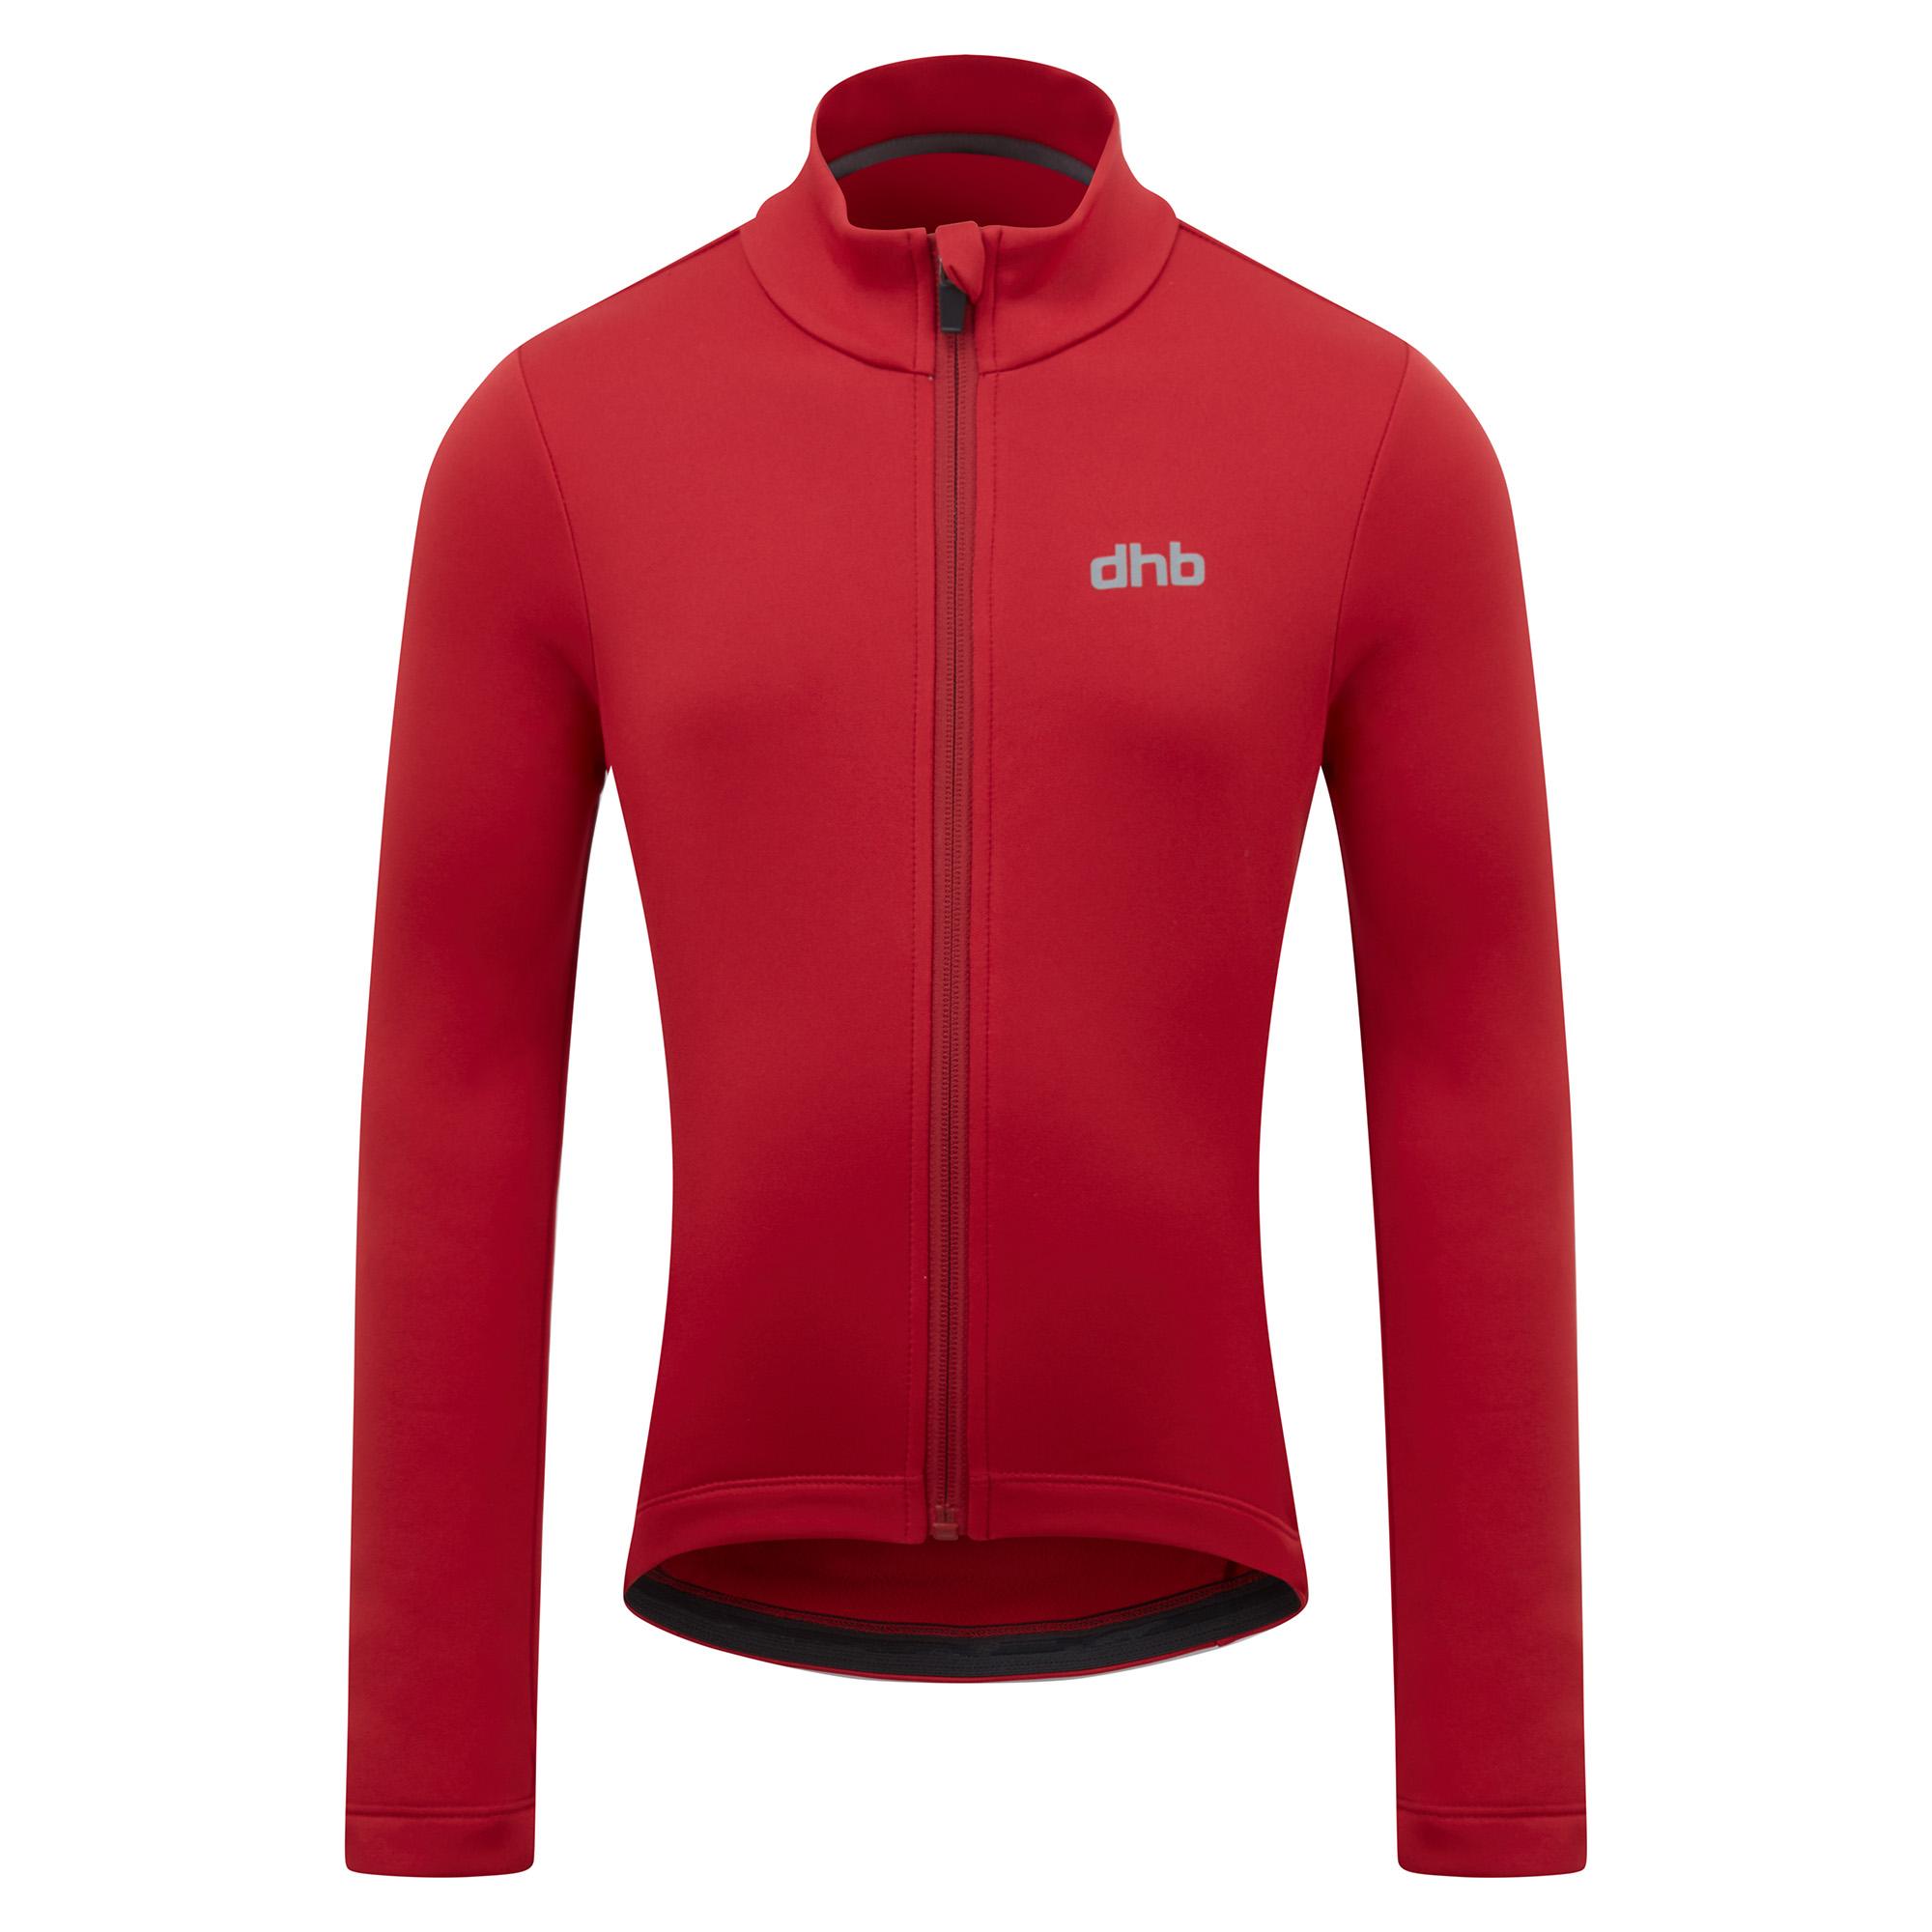 Dhb Kids Long Sleeve Thermal Jersey - Jester Red